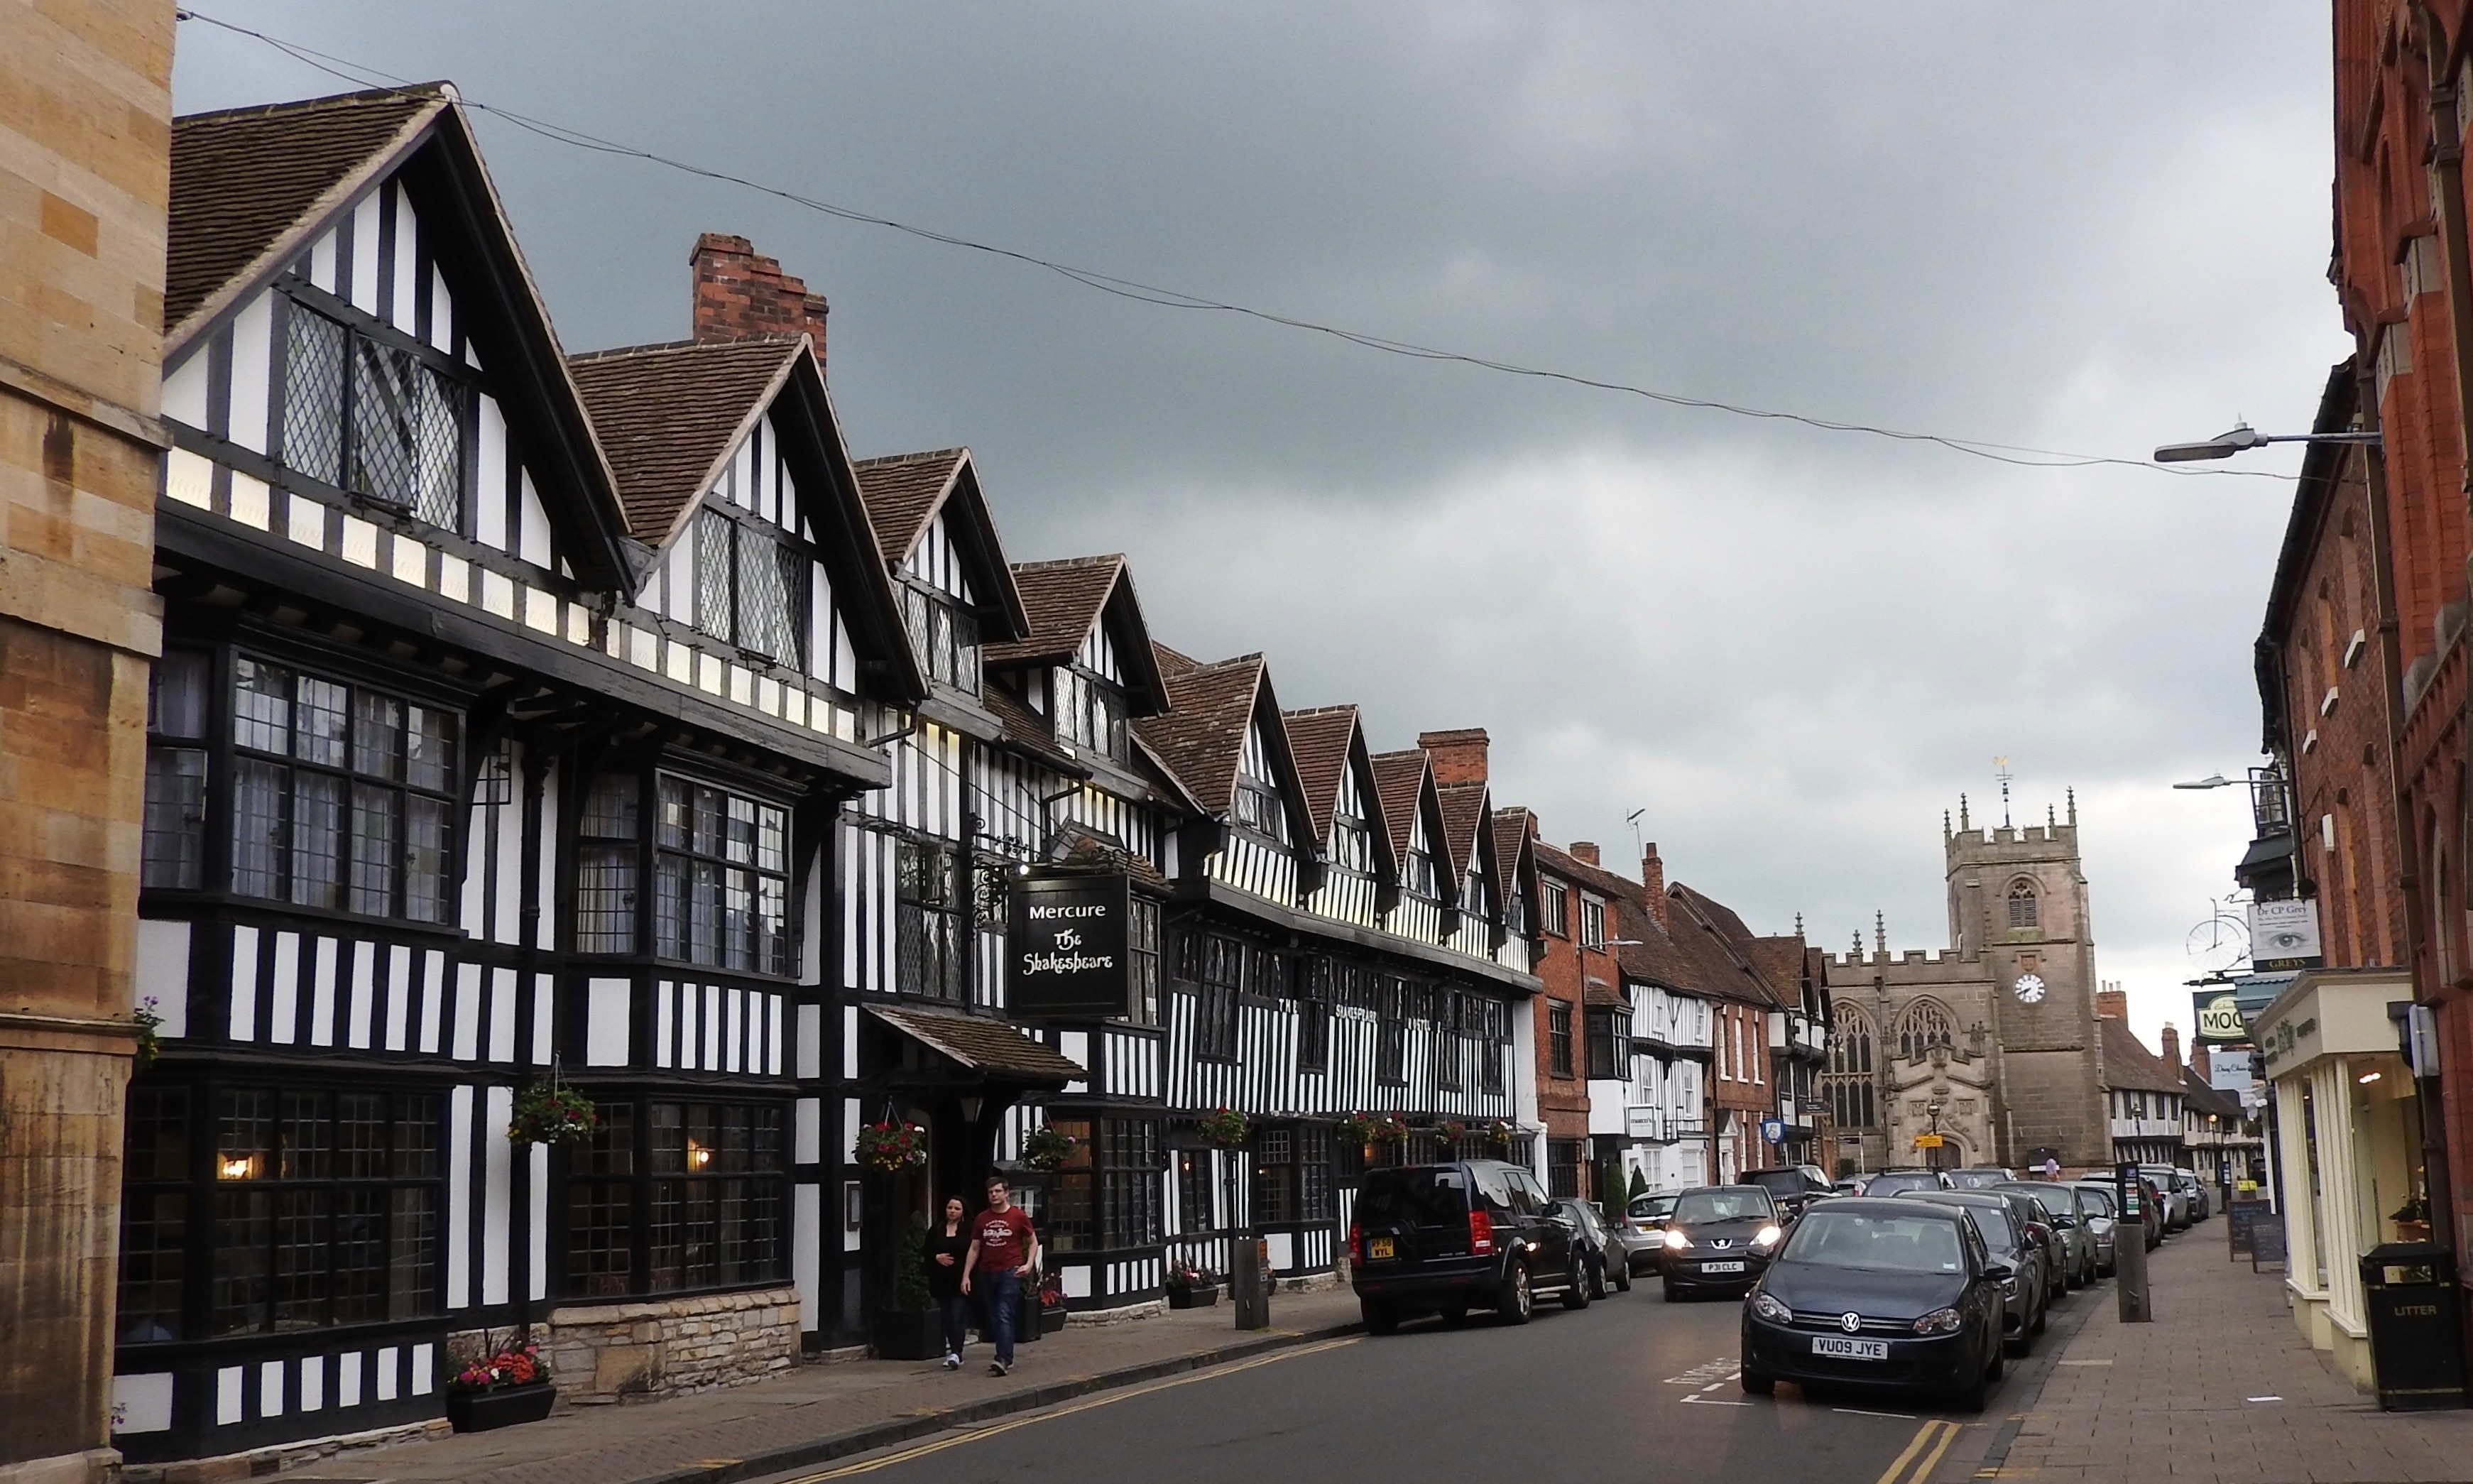 The Shakespeare Hotel in Stratford-upon-Avon dates back to 1637.

@LikeALocal #OnTheRoad